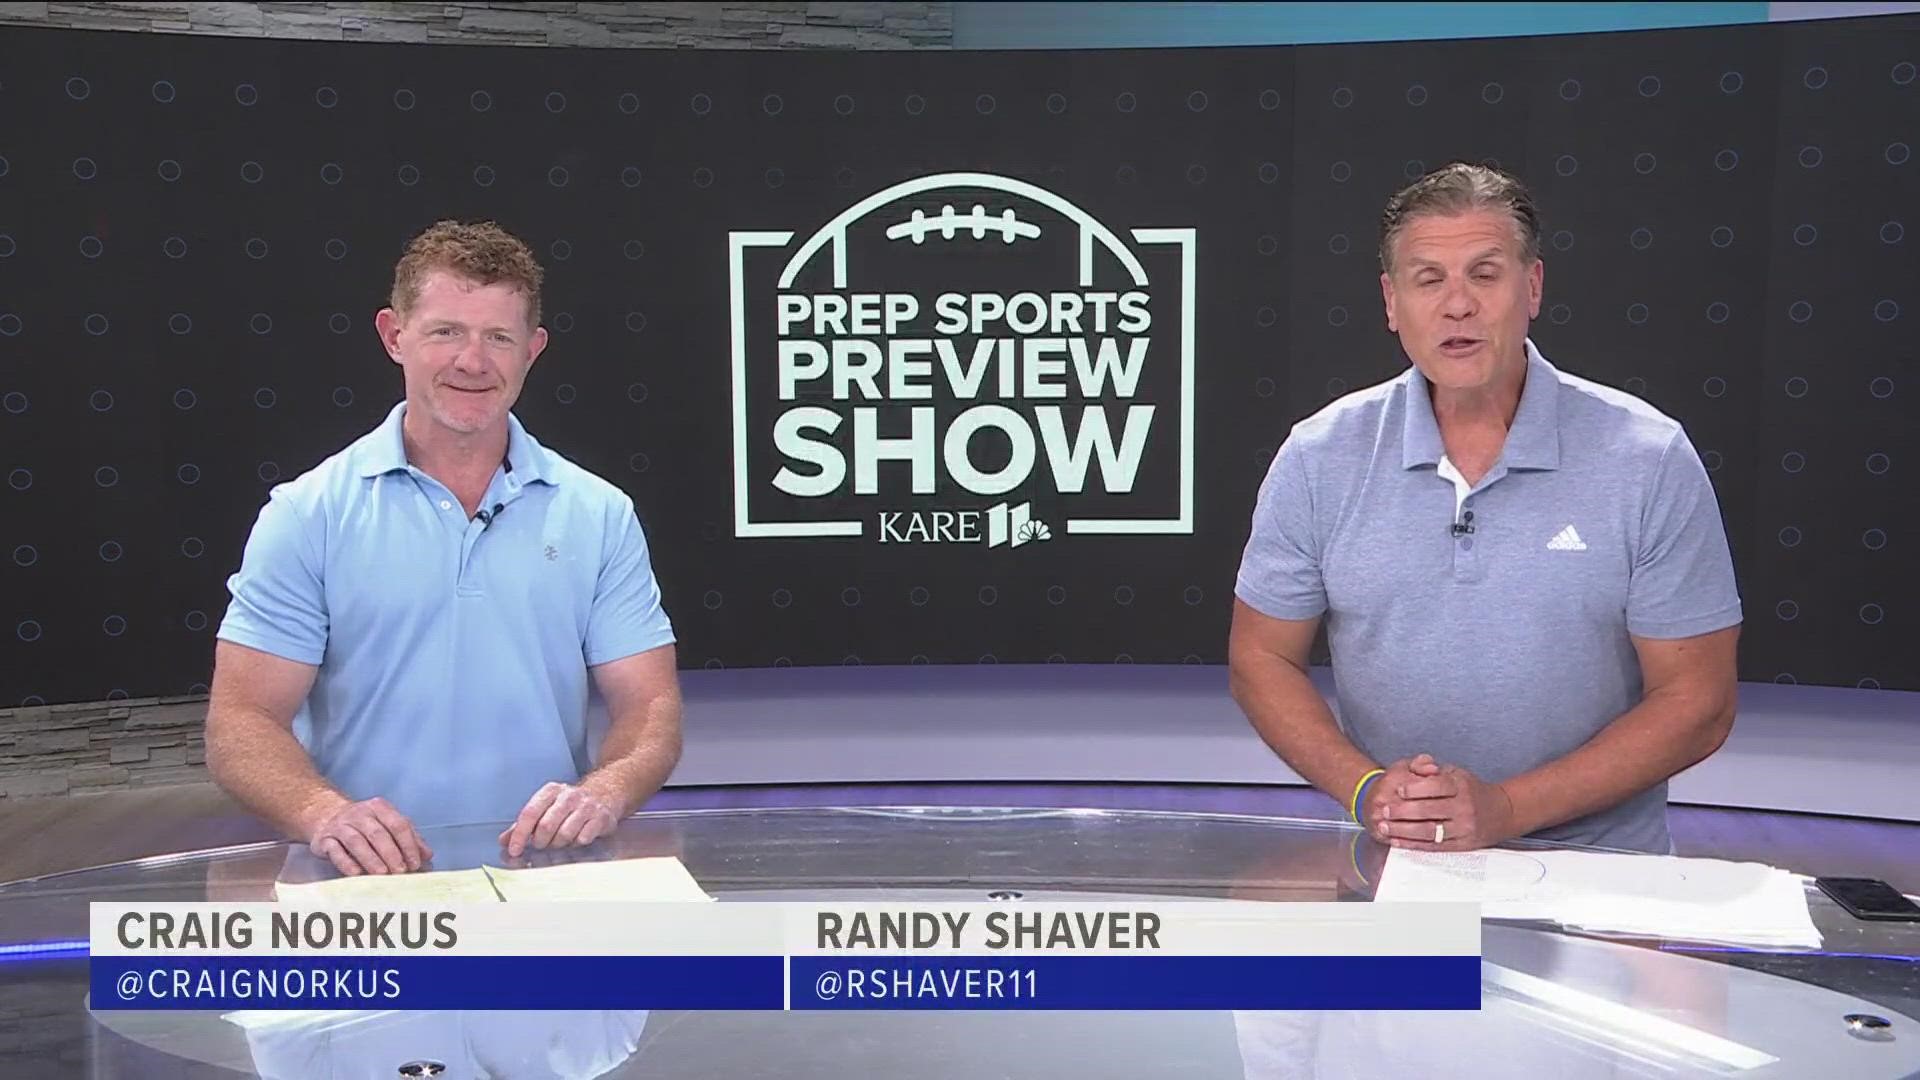 KARE 11's Randy Shaver and photojournalist Craig Norkus look ahead to this Friday's big games in high school football.